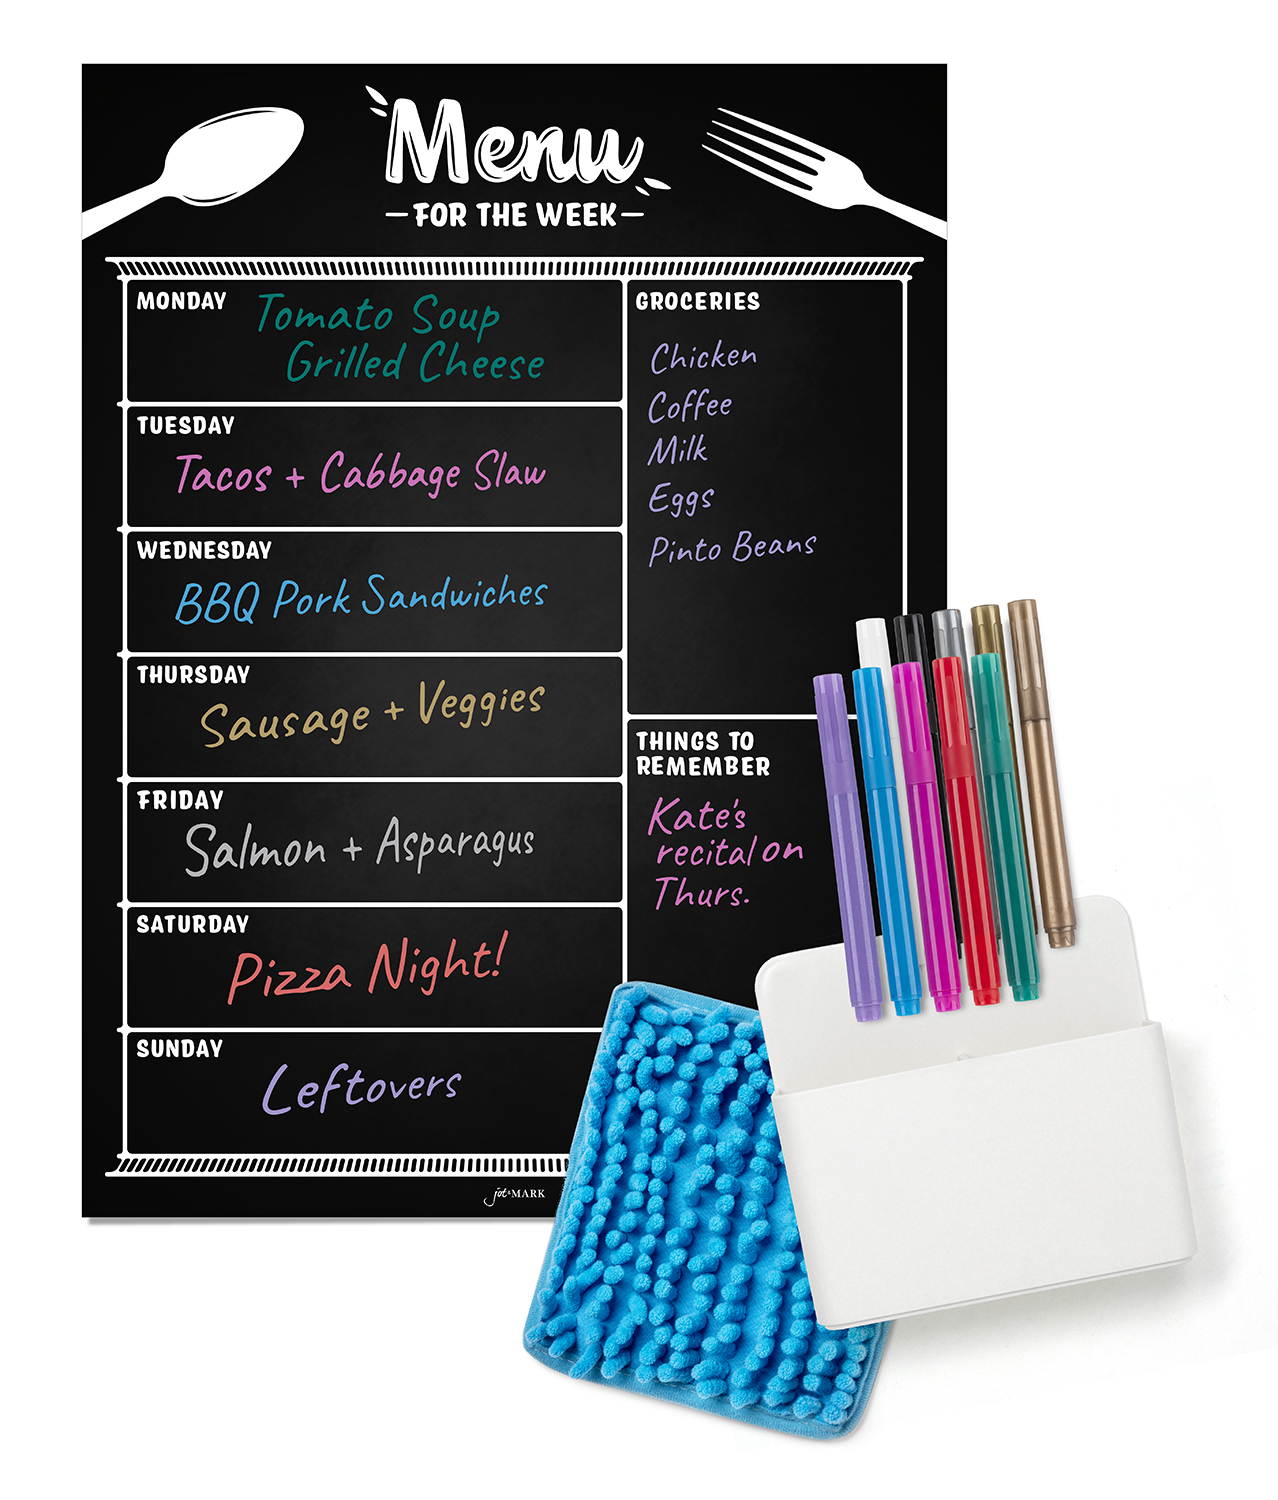 Dry Erase Products For Sale